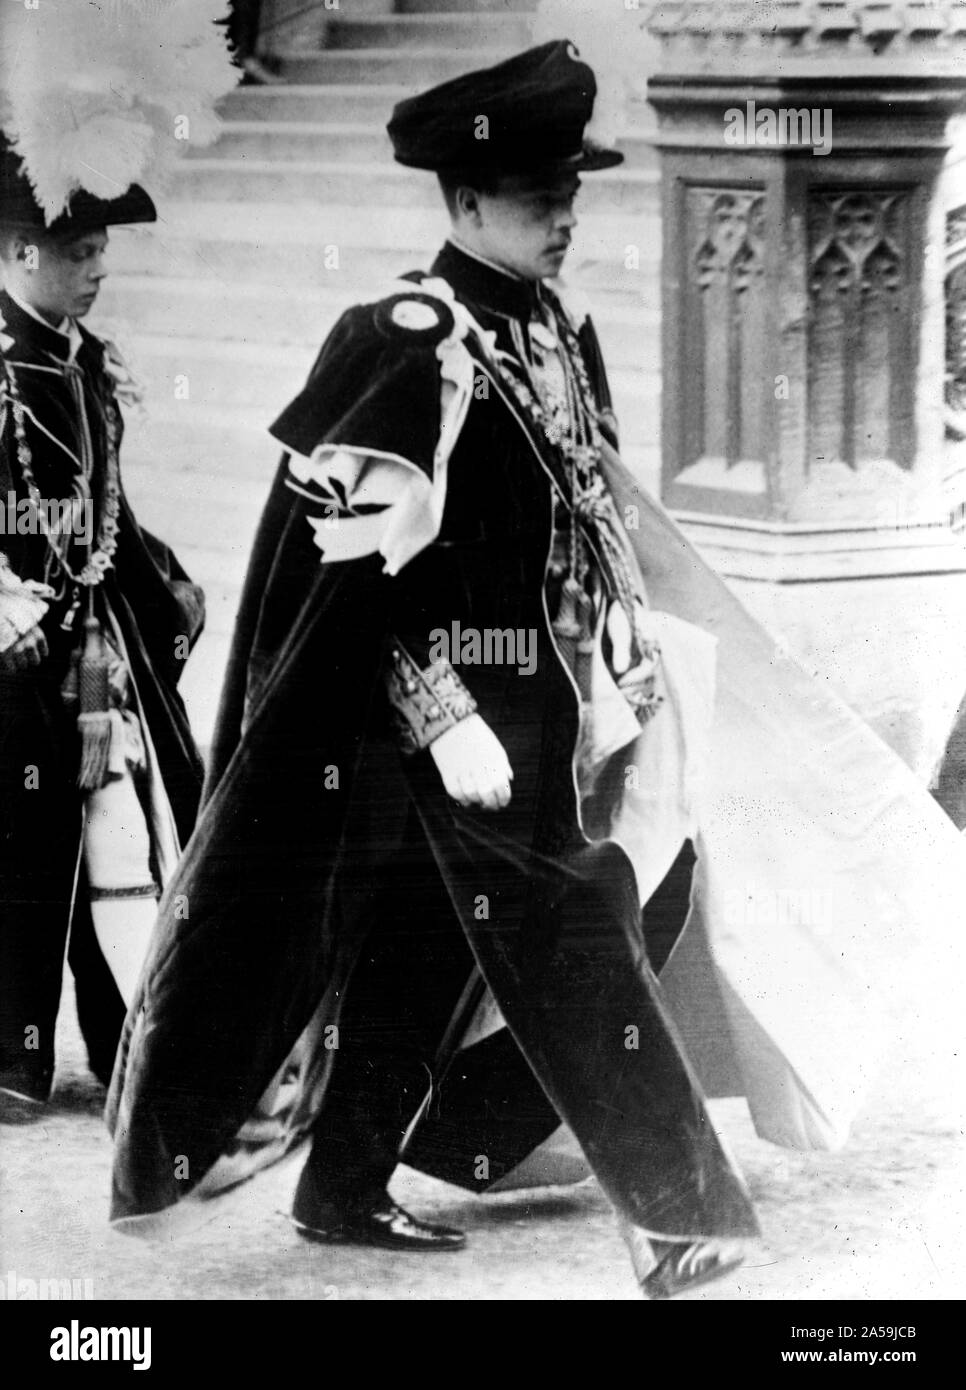 Photo shows King Manuel II of Portugal at St. George's Chapel, Windsor Castle, England, when the Prince of Wales was invested with the Order of the Garter on June 10, 1911. Stock Photo